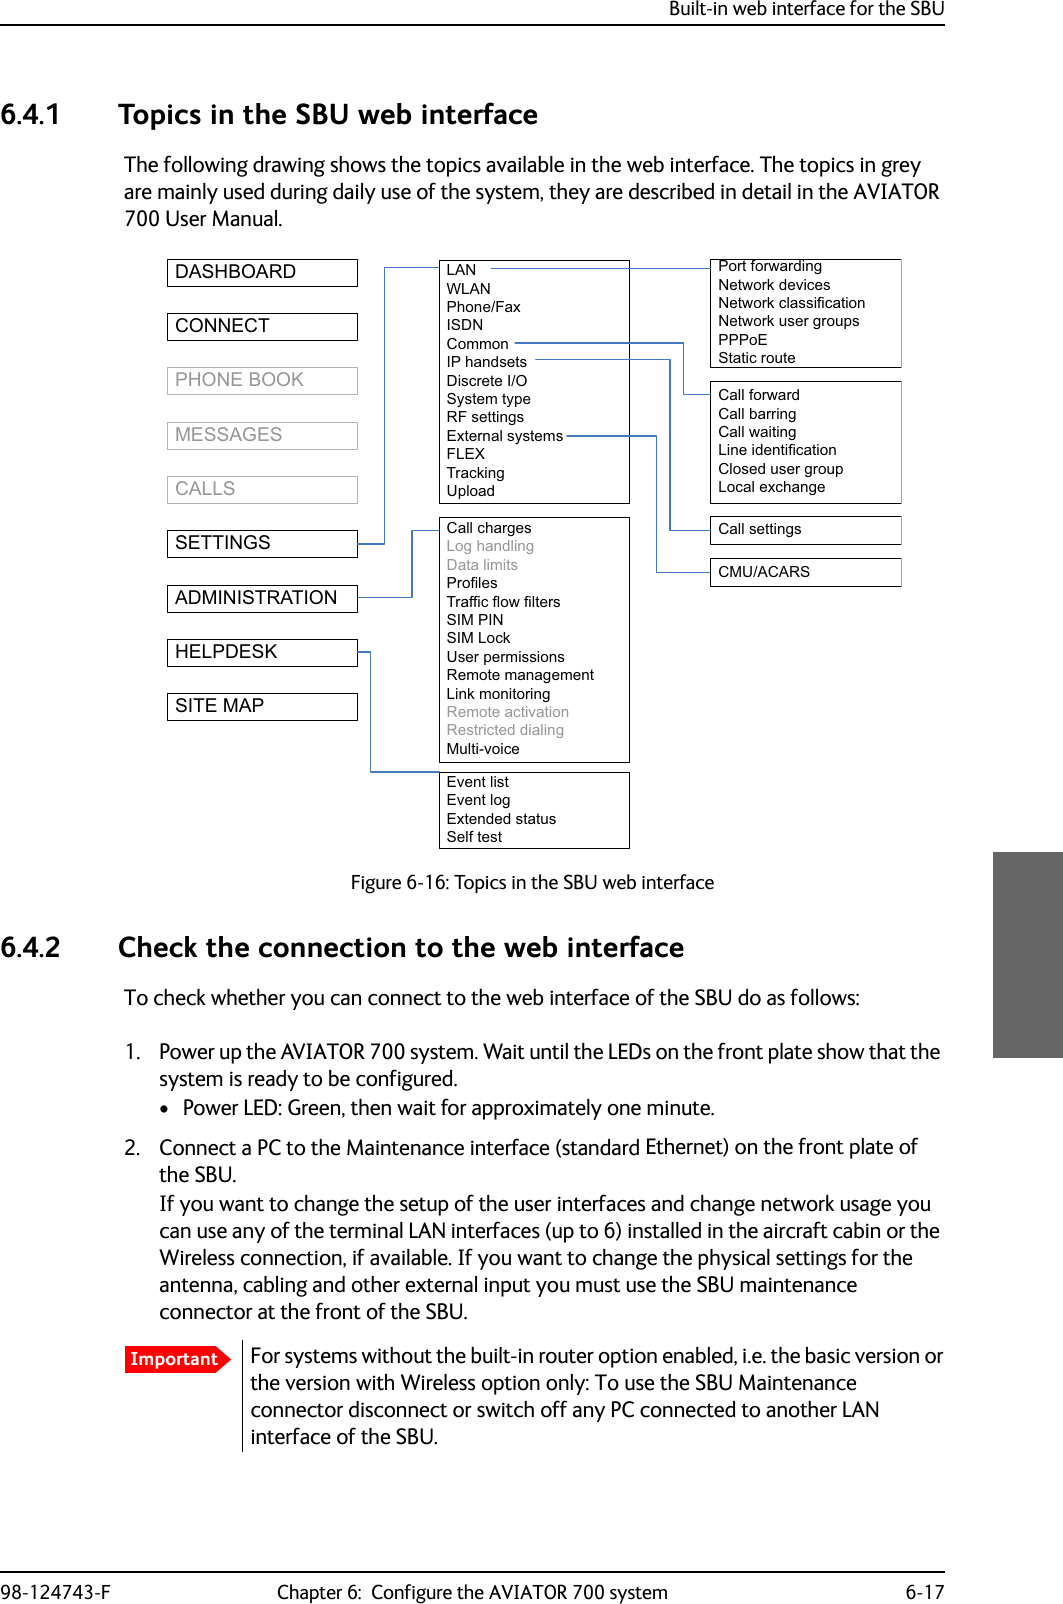 Built-in web interface for the SBU98-124743-F Chapter 6:  Configure the AVIATOR 700 system 6-176.4.1 Topics in the SBU web interfaceThe following drawing shows the topics available in the web interface. The topics in grey are mainly used during daily use of the system, they are described in detail in the AVIATOR 700 User Manual.Figure 6-16: Topics in the SBU web interface6.4.2 Check the connection to the web interfaceTo check whether you can connect to the web interface of the SBU do as follows:1. Power up the AVIATOR 700 system. Wait until the LEDs on the front plate show that the system is ready to be configured. •Power LED: Green, then wait for approximately one minute.2. Connect a PC to the Maintenance interface (standard Ethernet) on the front plate of the SBU.If you want to change the setup of the user interfaces and change network usage you can use any of the terminal LAN interfaces (up to 6) installed in the aircraft cabin or the Wireless connection, if available. If you want to change the physical settings for the antenna, cabling and other external input you must use the SBU maintenance connector at the front of the SBU. 3RUWIRUZDUGLQJ 1HWZRUNGHYLFHV1HWZRUNFODVVLILFDWLRQ1HWZRUNXVHUJURXSV333R(6WDWLFURXWH&amp;DOOIRUZDUG &amp;DOOEDUULQJ &amp;DOOZDLWLQJ /LQHLGHQWLILFDWLRQ &amp;ORVHGXVHUJURXS/RFDOH[FKDQJH/$1:/$13KRQH)D[,6&apos;1&amp;RPPRQ,3KDQGVHWV&apos;LVFUHWH,26\VWHPW\SH5)VHWWLQJV([WHUQDOV\VWHPV)/(;7UDFNLQJ8SORDG&amp;DOOFKDUJHV /RJKDQGOLQJ&apos;DWDOLPLWV 3URILOHV 7UDIILFIORZILOWHUV 6,03,16,0/RFN 8VHUSHUPLVVLRQV5HPRWHPDQDJHPHQW/LQNPRQLWRULQJ5HPRWHDFWLYDWLRQ5HVWULFWHGGLDOLQJ0XOWLYRLFH(YHQWOLVW (YHQWORJ([WHQGHGVWDWXV 6HOIWHVW&apos;$6+%2$5&apos;&amp;211(&amp;73+21(%22.0(66$*(6&amp;$//66(77,1*6$&apos;0,1,675$7,21+(/3&apos;(6.6,7(0$3&amp;DOOVHWWLQJV&amp;08$&amp;$56ImportantFor systems without the built-in router option enabled, i.e. the basic version or the version with Wireless option only: To use the SBU Maintenance connector disconnect or switch off any PC connected to another LAN interface of the SBU.